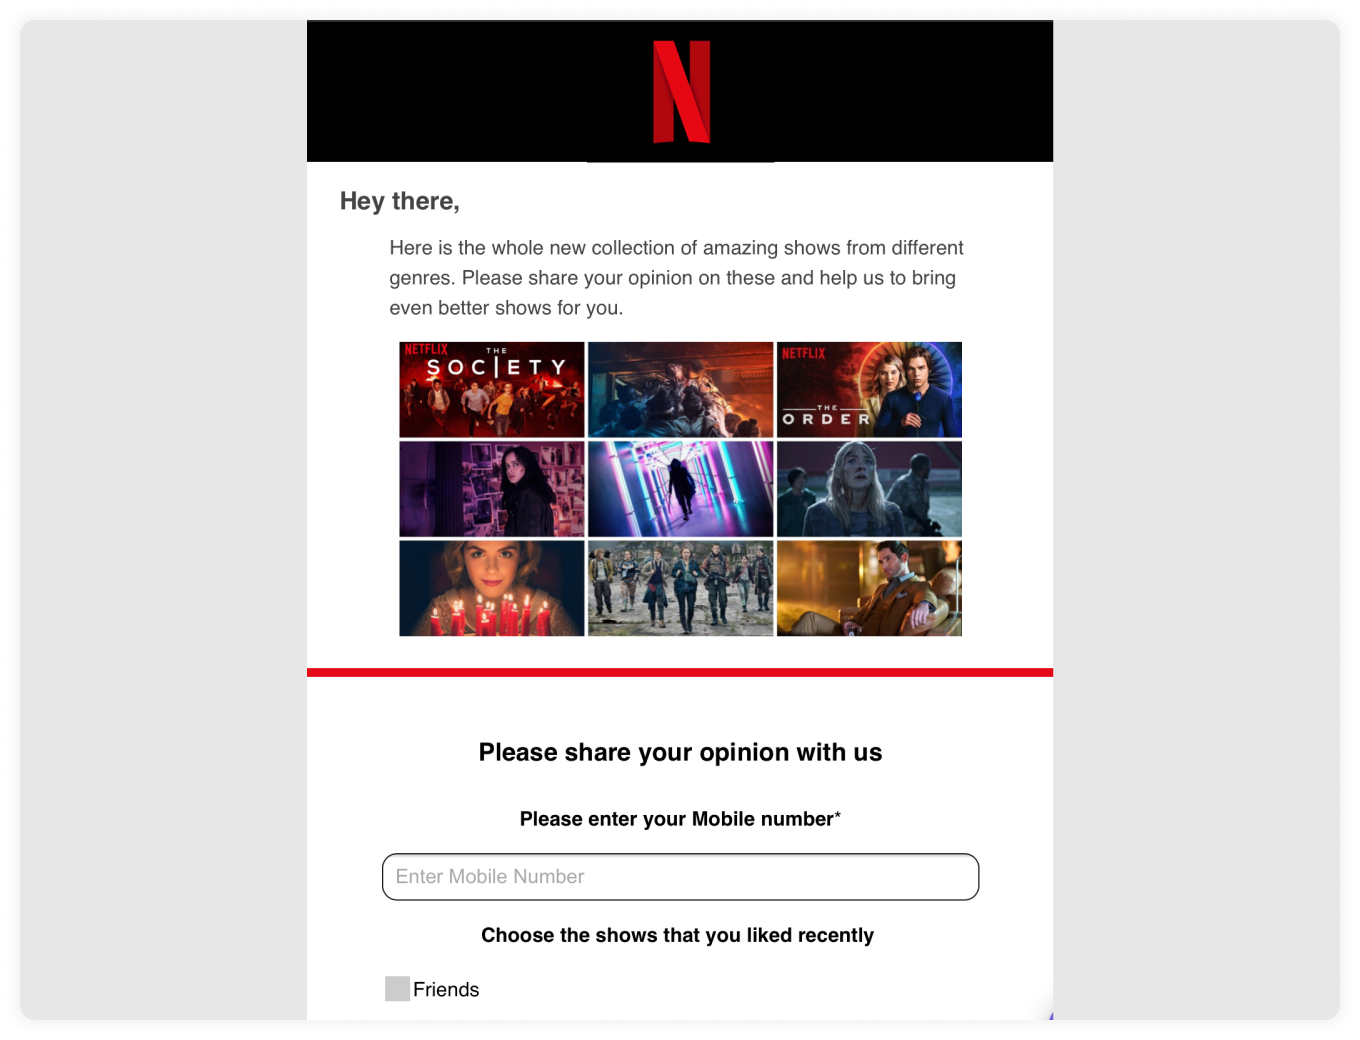 Entertainment email template by Netflix